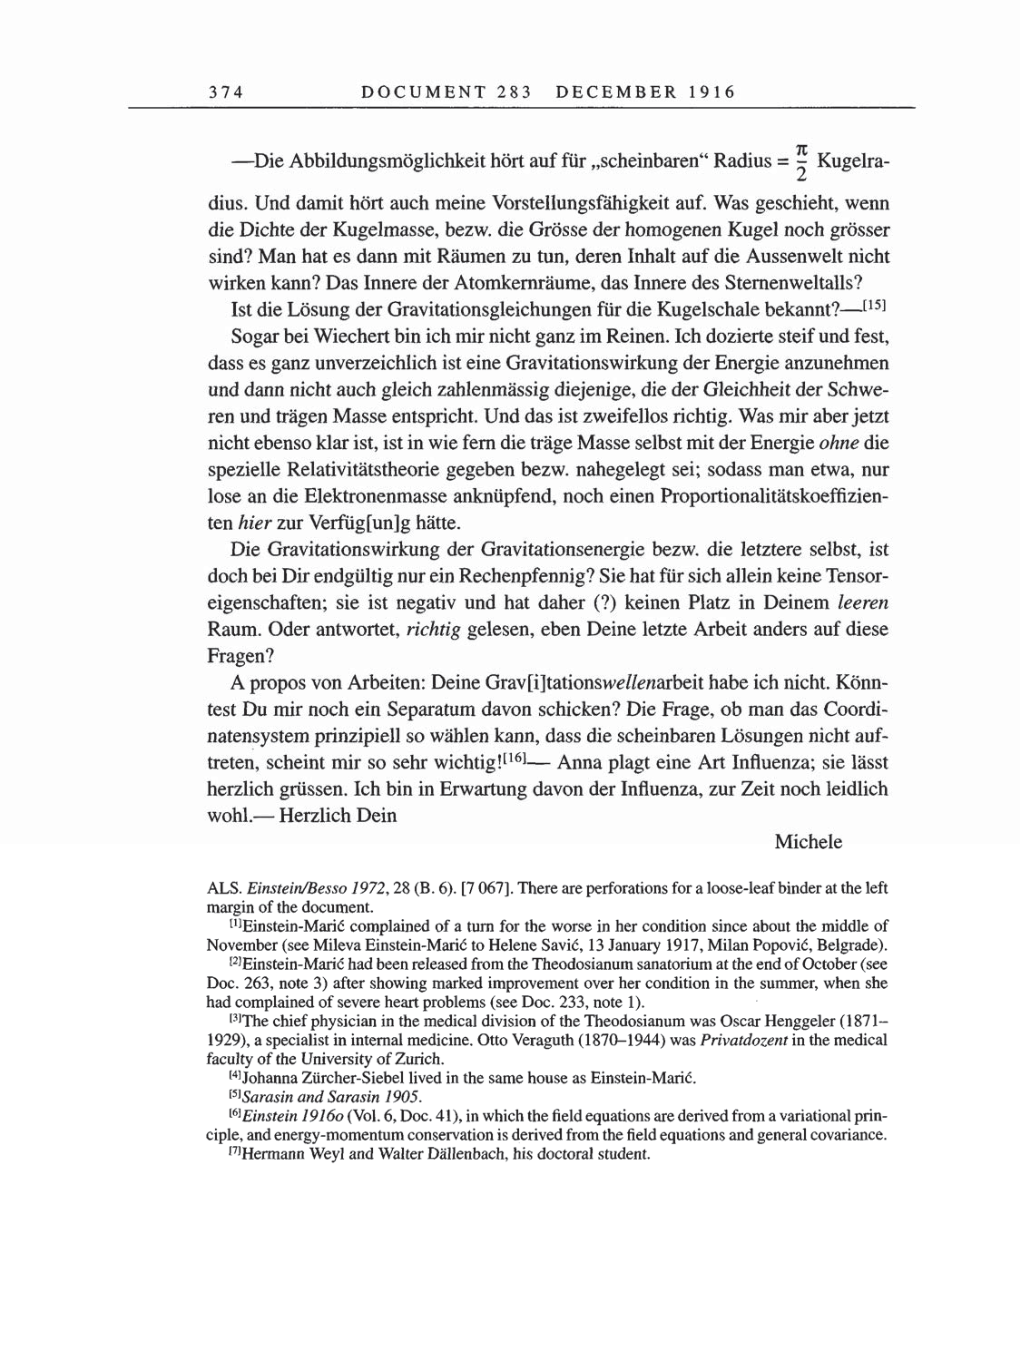 Volume 8, Part A: The Berlin Years: Correspondence 1914-1917 page 374